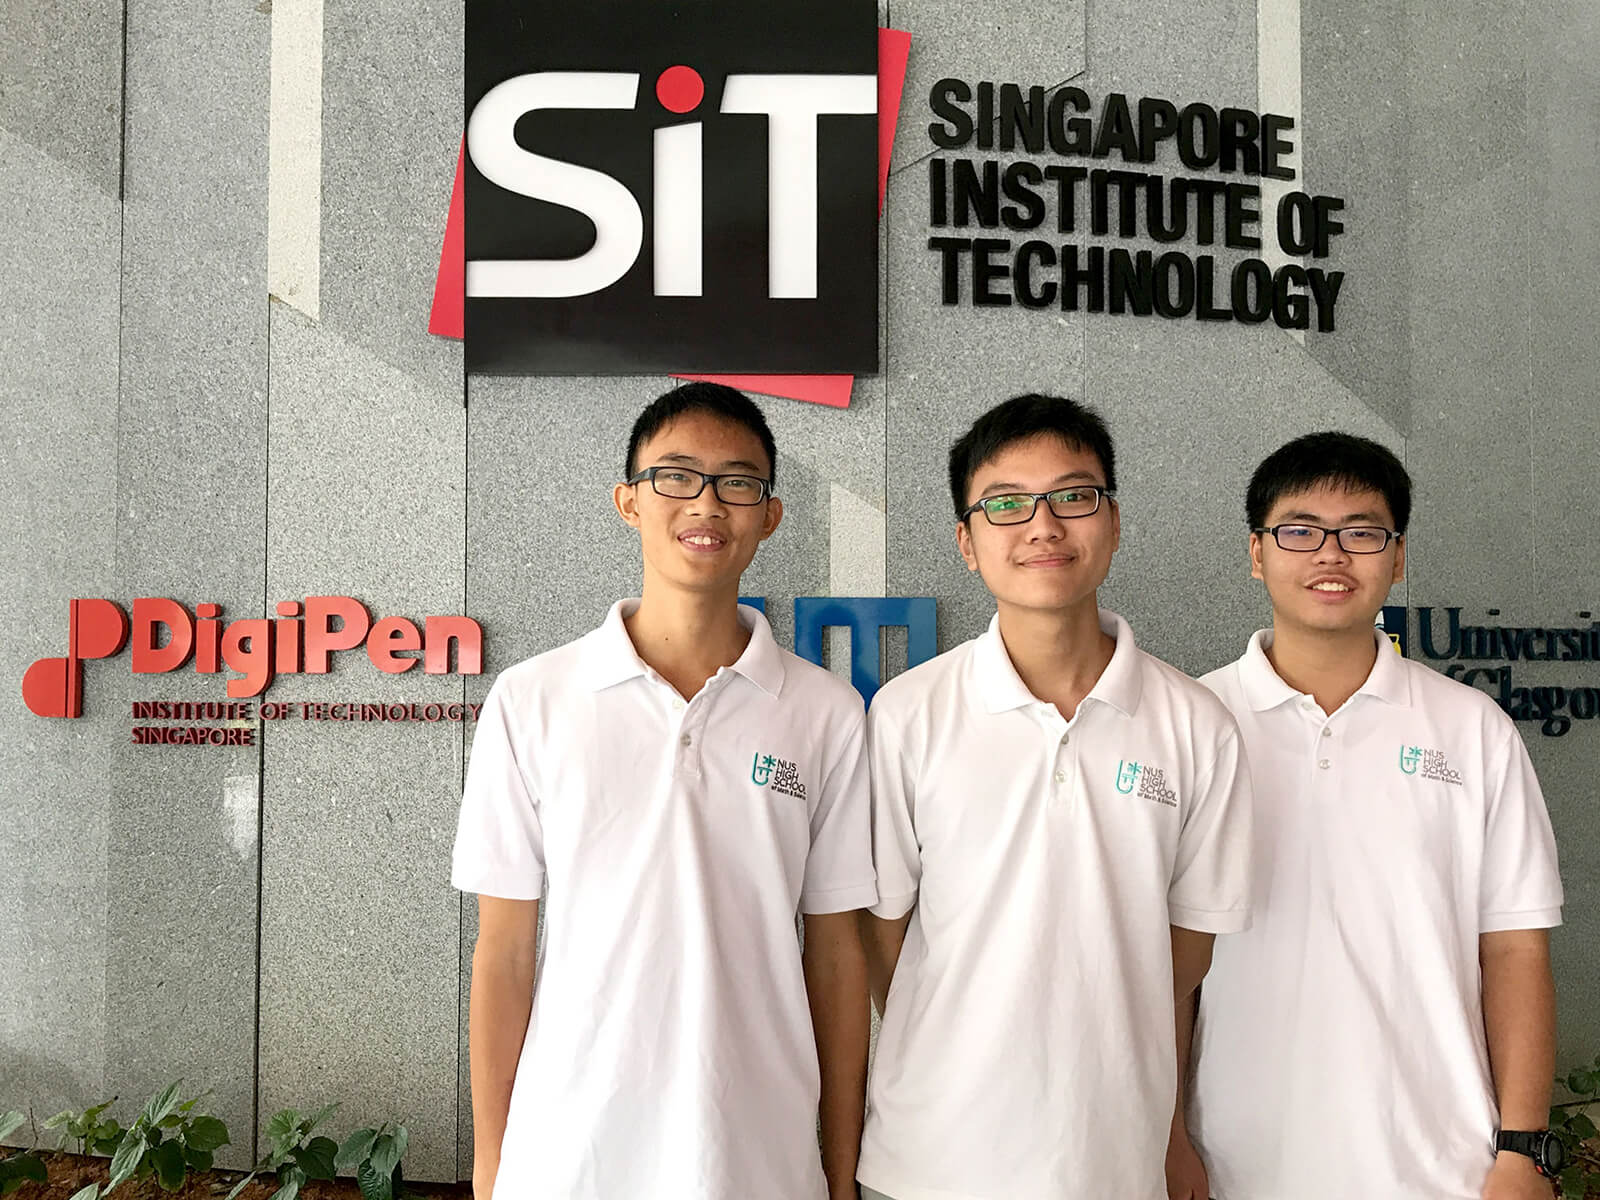 Three students from NUS High School pose for a photo in front of a gray marble wall with the SIT and DigiPen logos